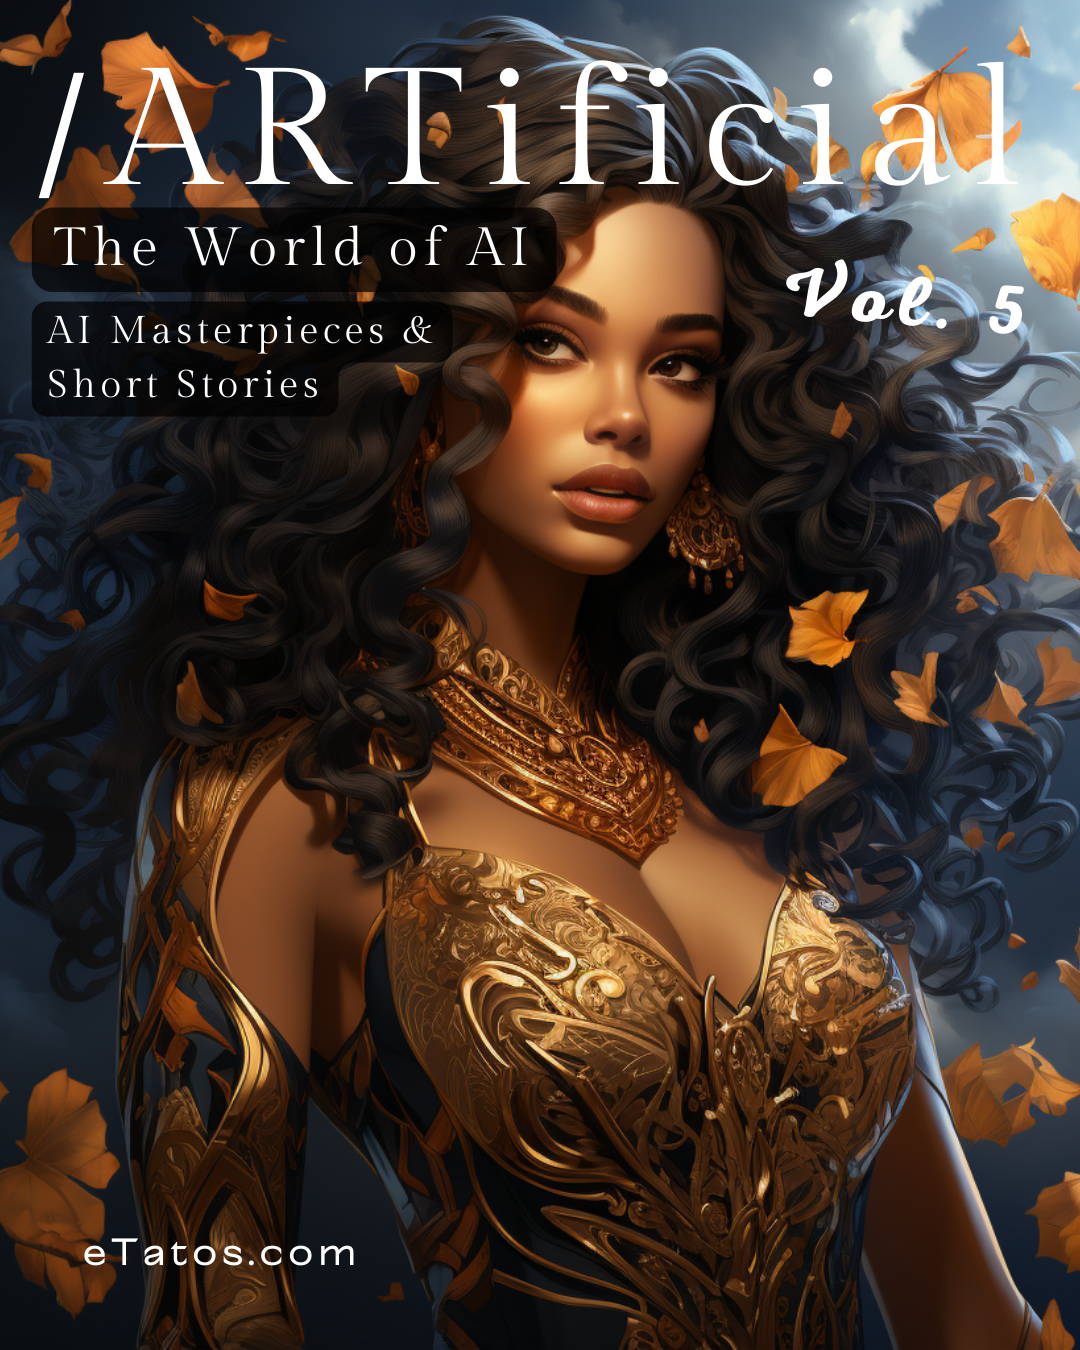 You are currently viewing ARTificial Magazine Vol. 5: Exclusive AI Art & Stories